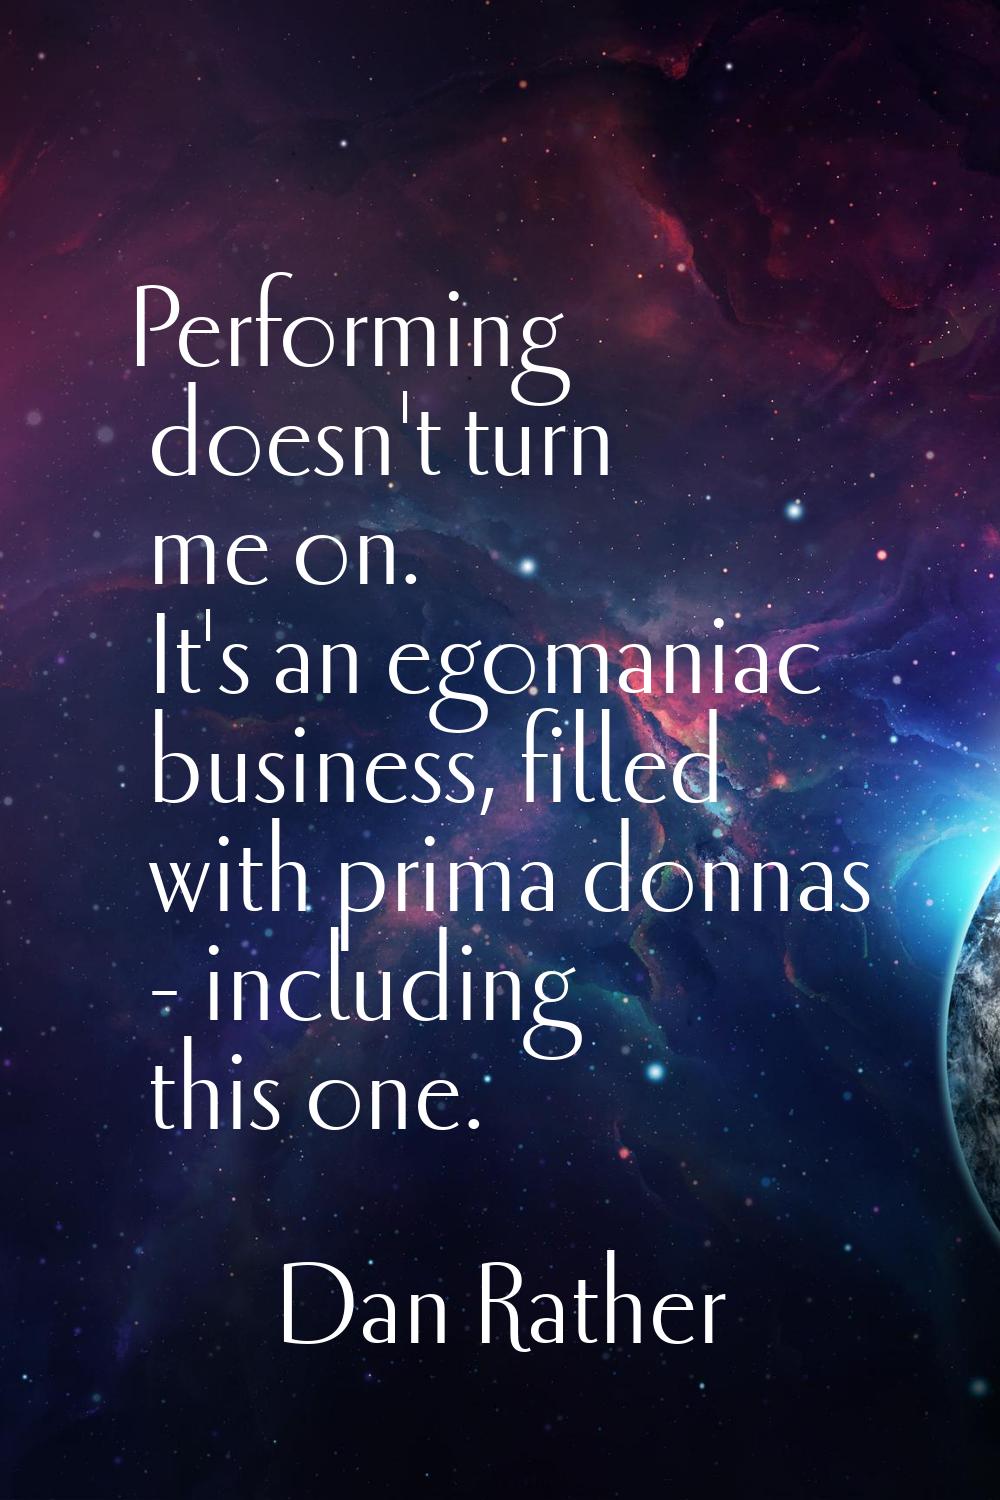 Performing doesn't turn me on. It's an egomaniac business, filled with prima donnas - including thi